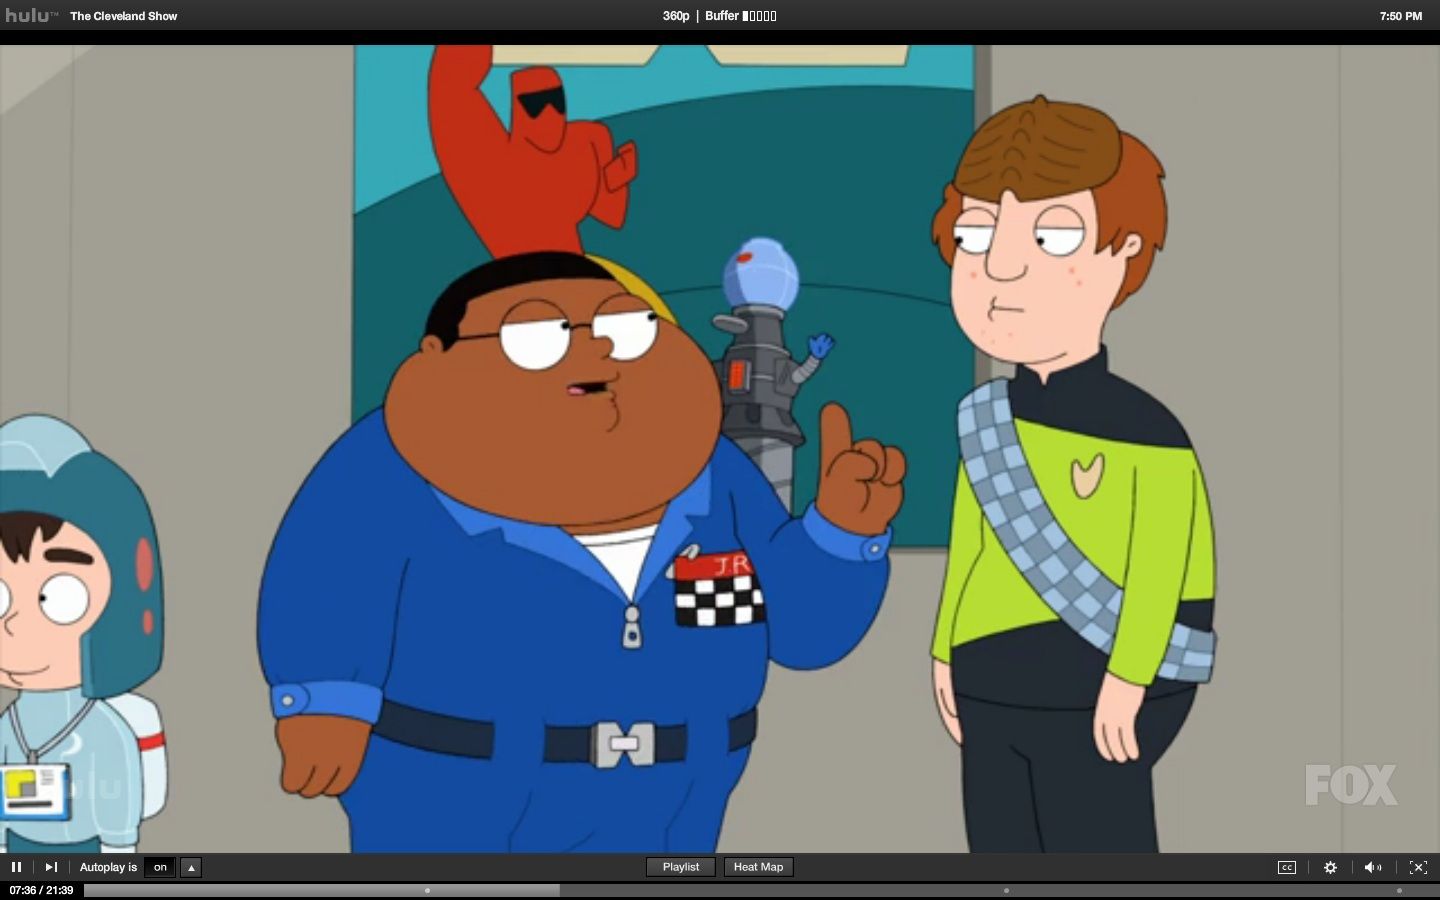 MST3K Reference on The Cleveland Show « Satellite News